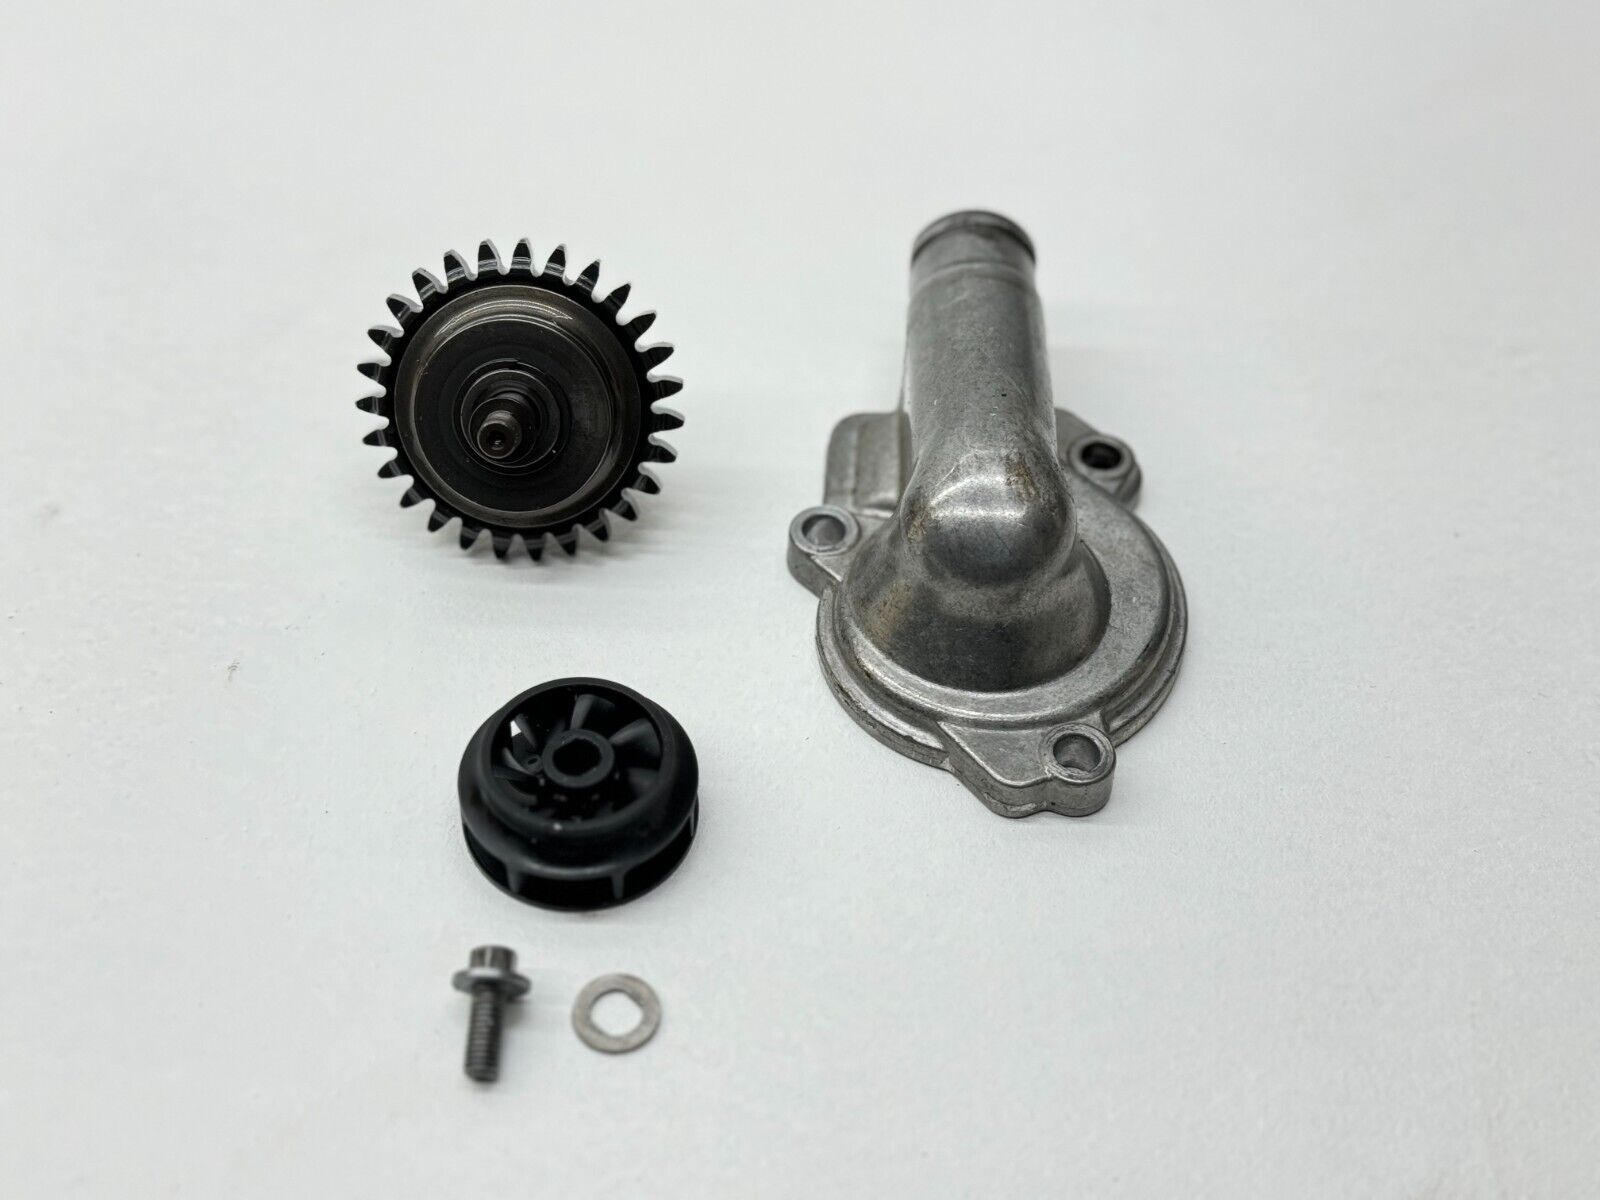 2020 KTM 125SX Water Pump Impeller Cover Kit Bolt Gear Washer Assembly 125 SX